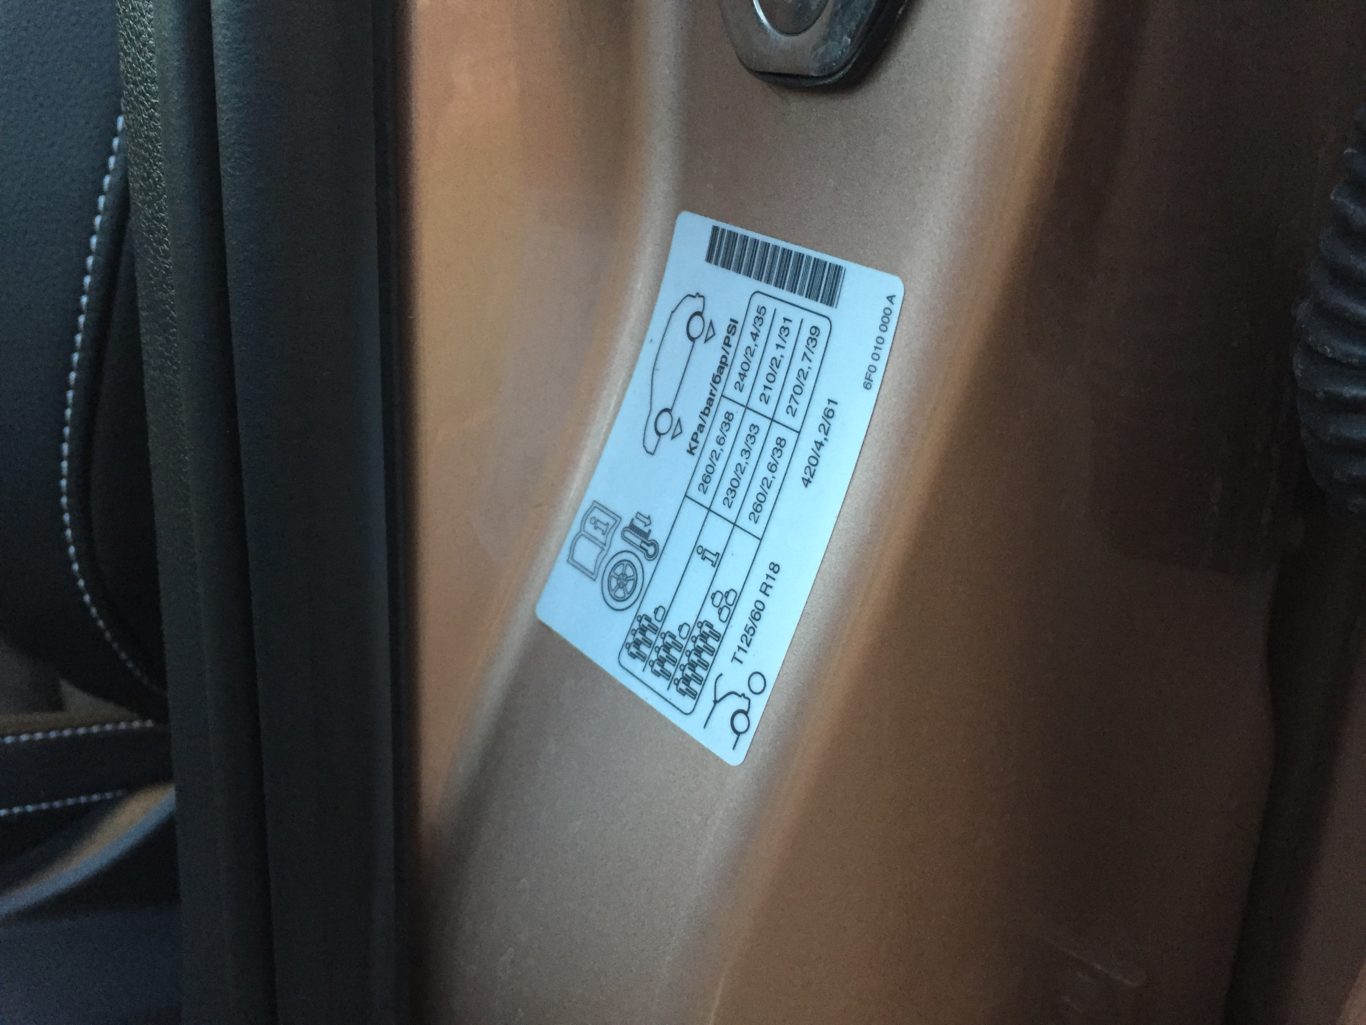 The tyre pressure sticker is now located inside the door